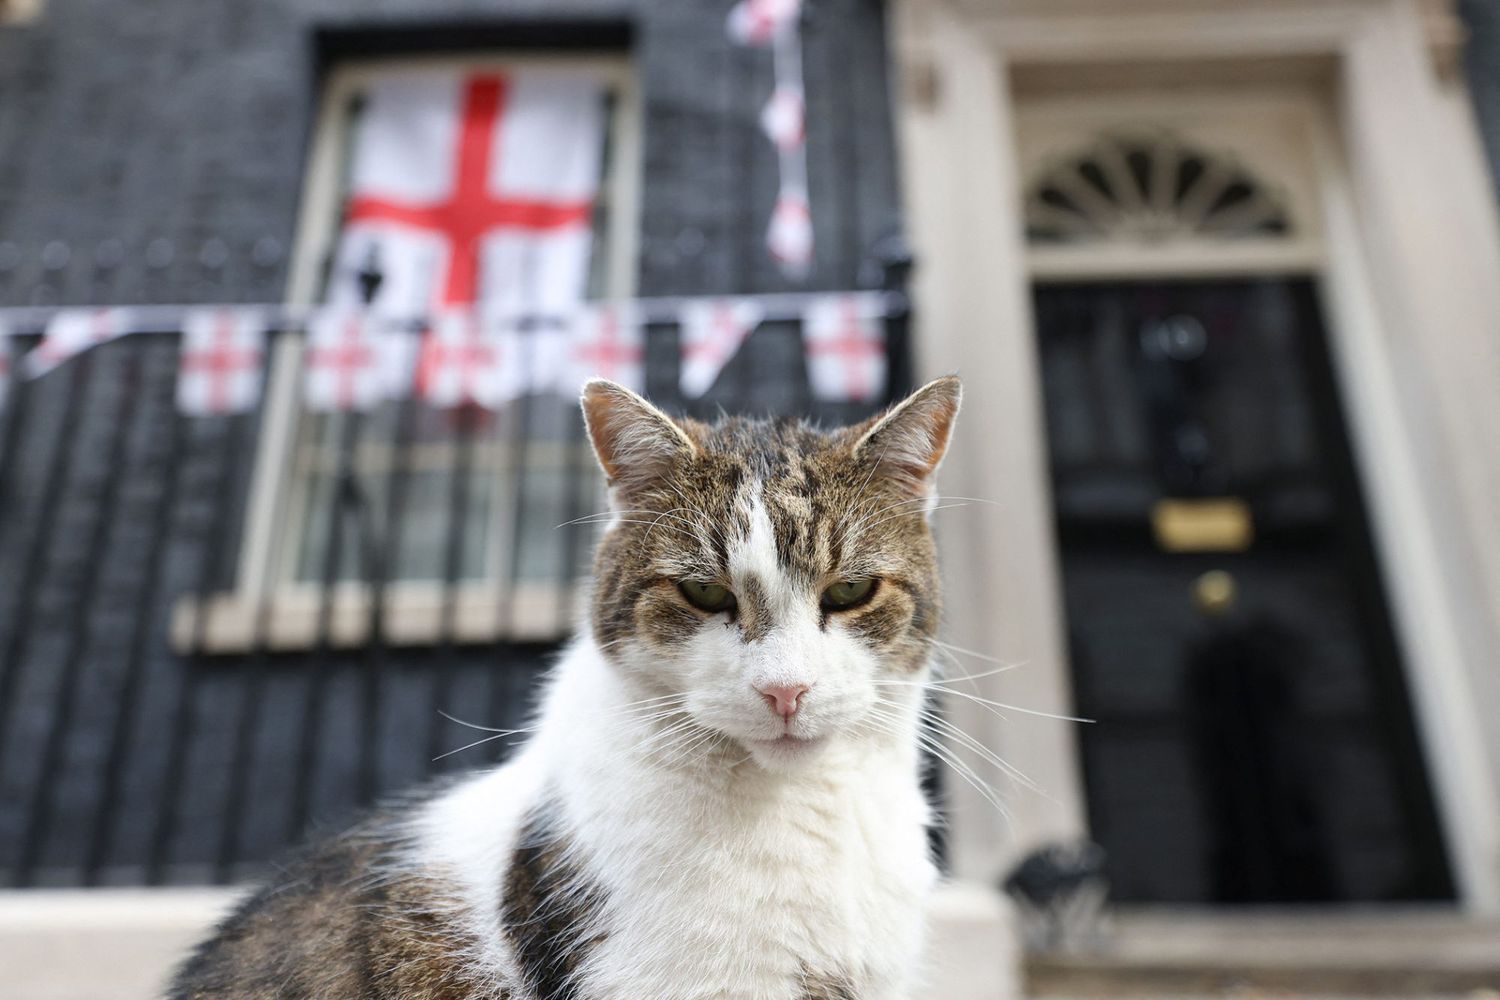 larry the cat, who survives another prime minister, sits out in front of 10 Downing Street in London